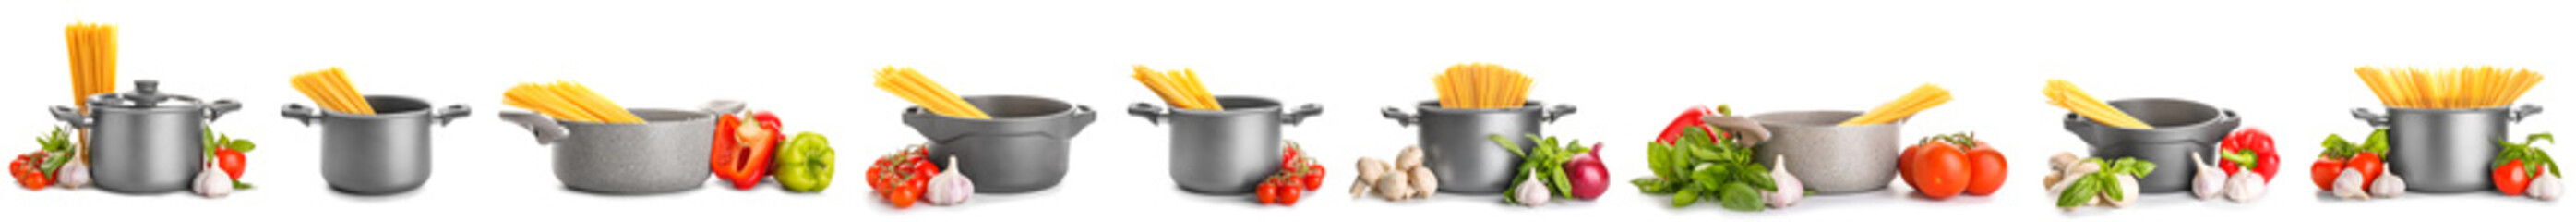 Collage of cooking pots with raw pasta and vegetables on white background